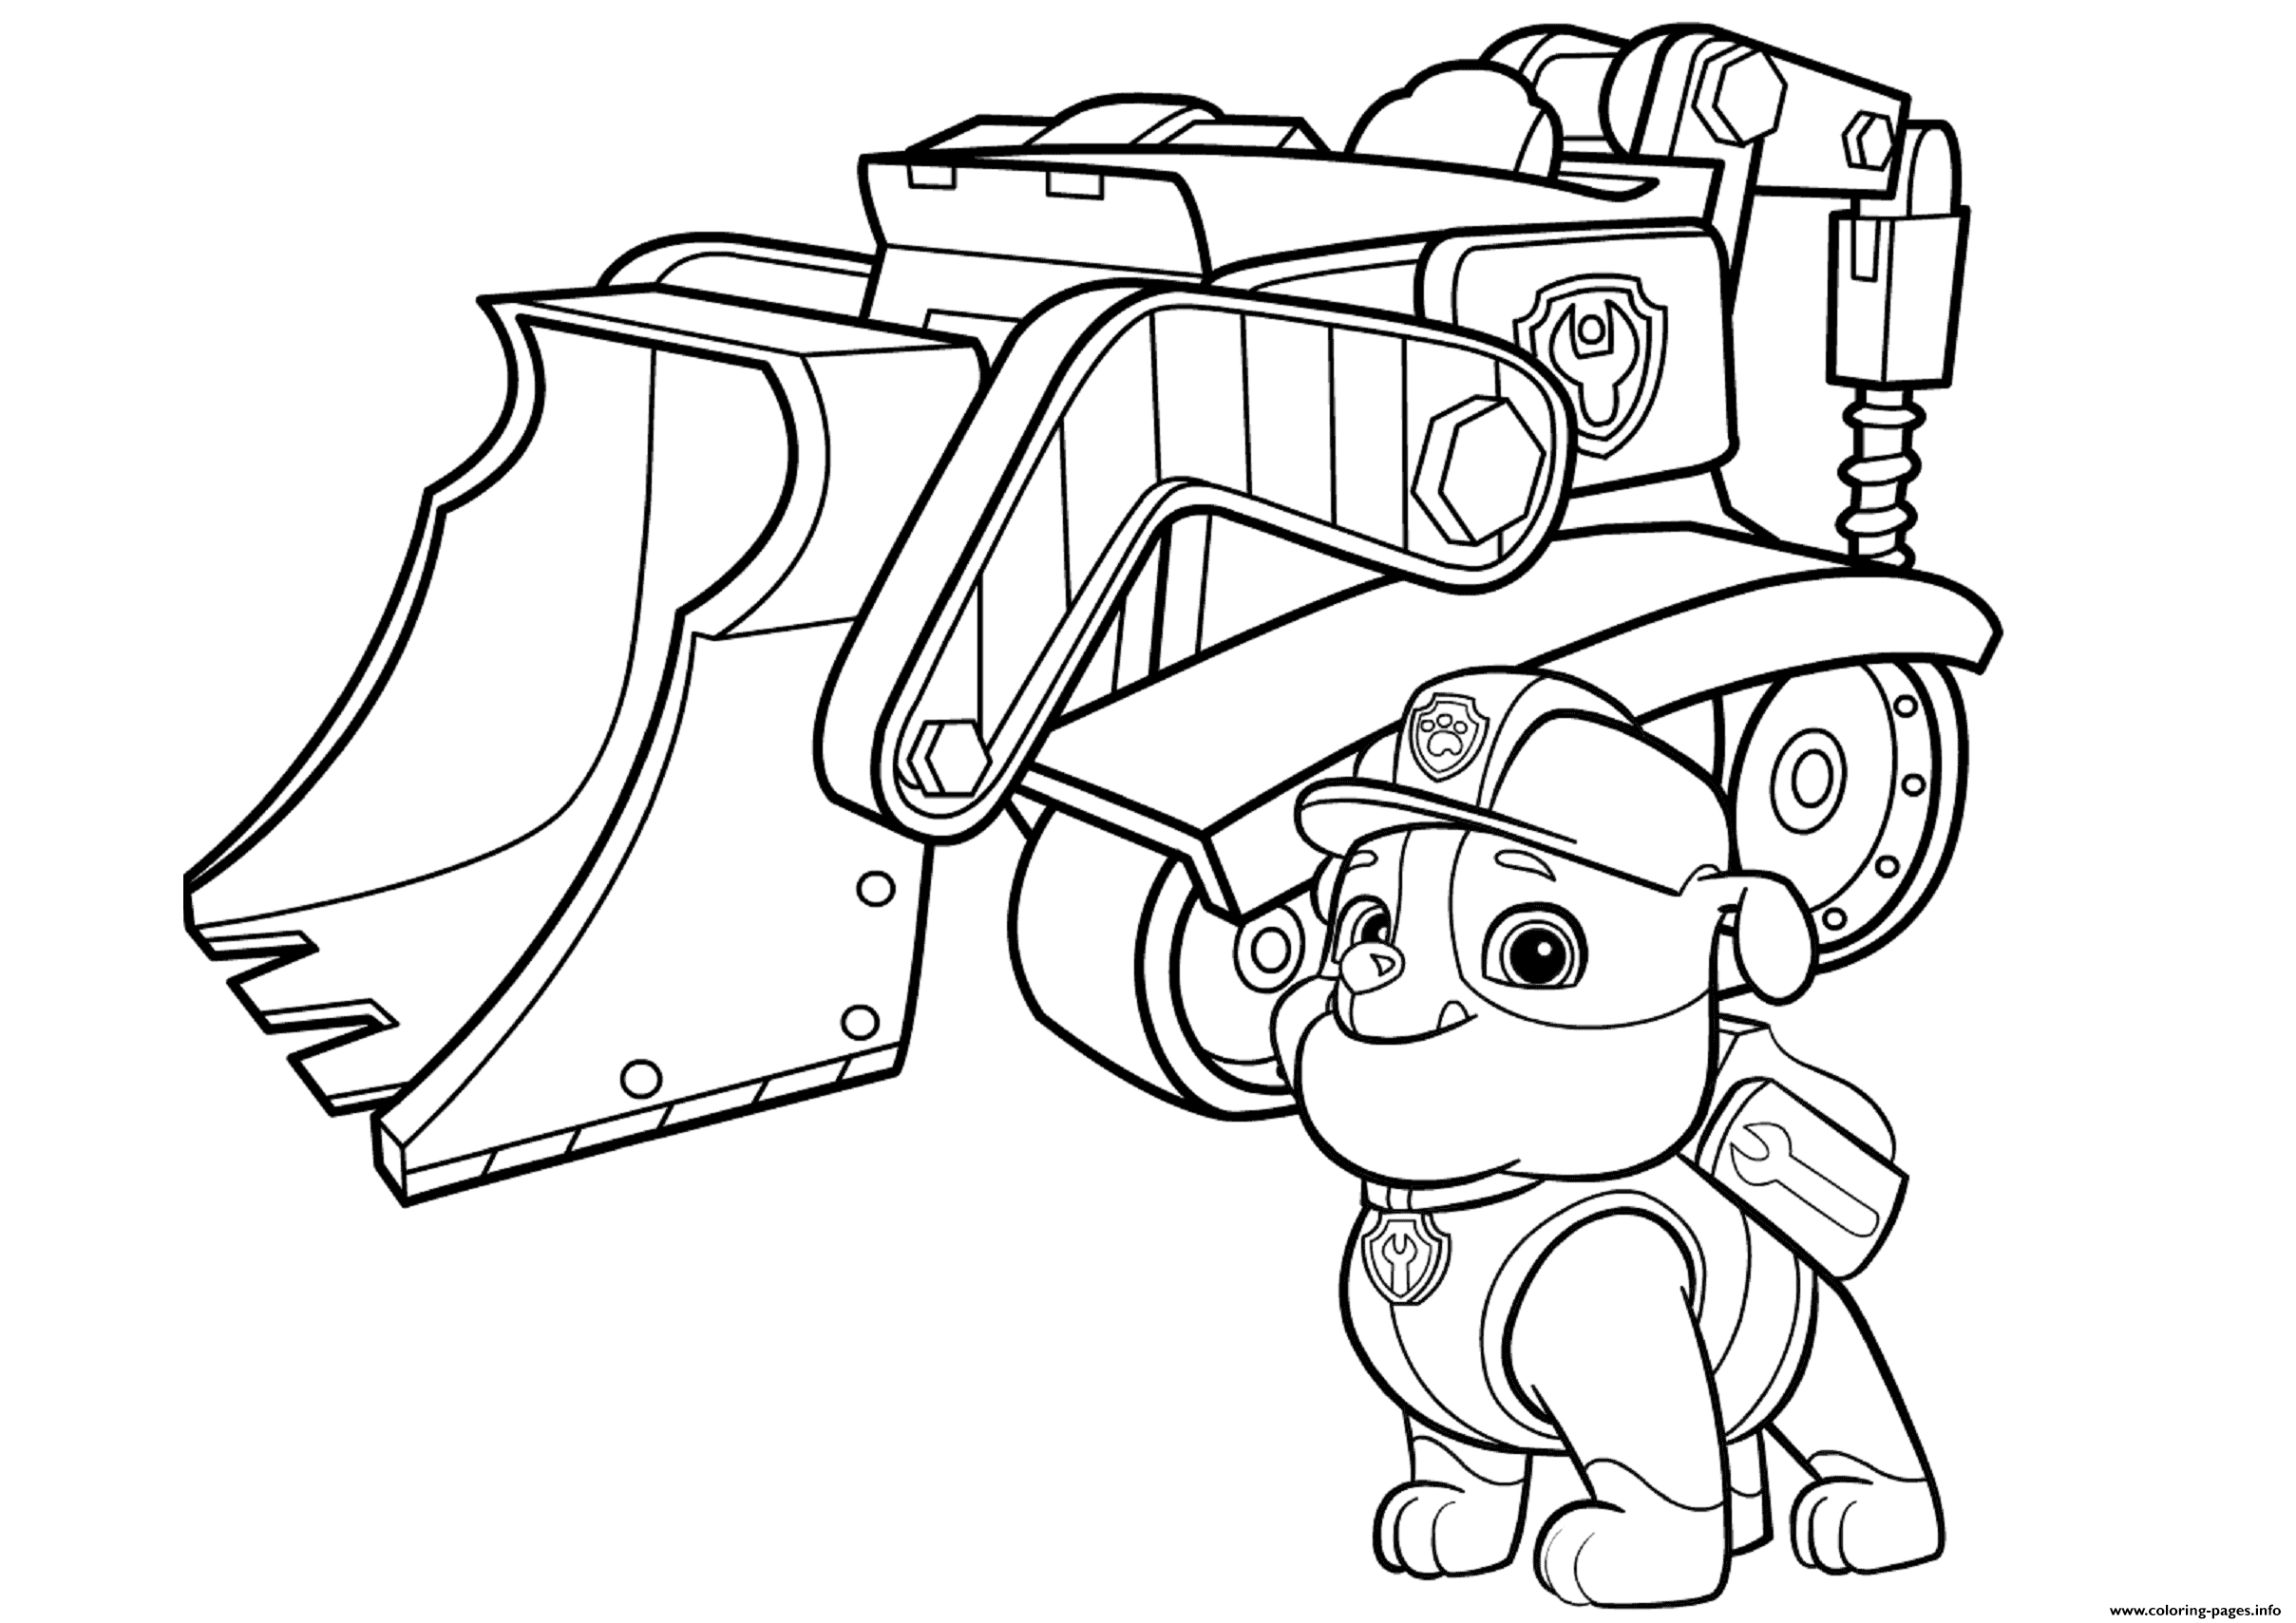 free paw patrol coloring pages happiness is homemade